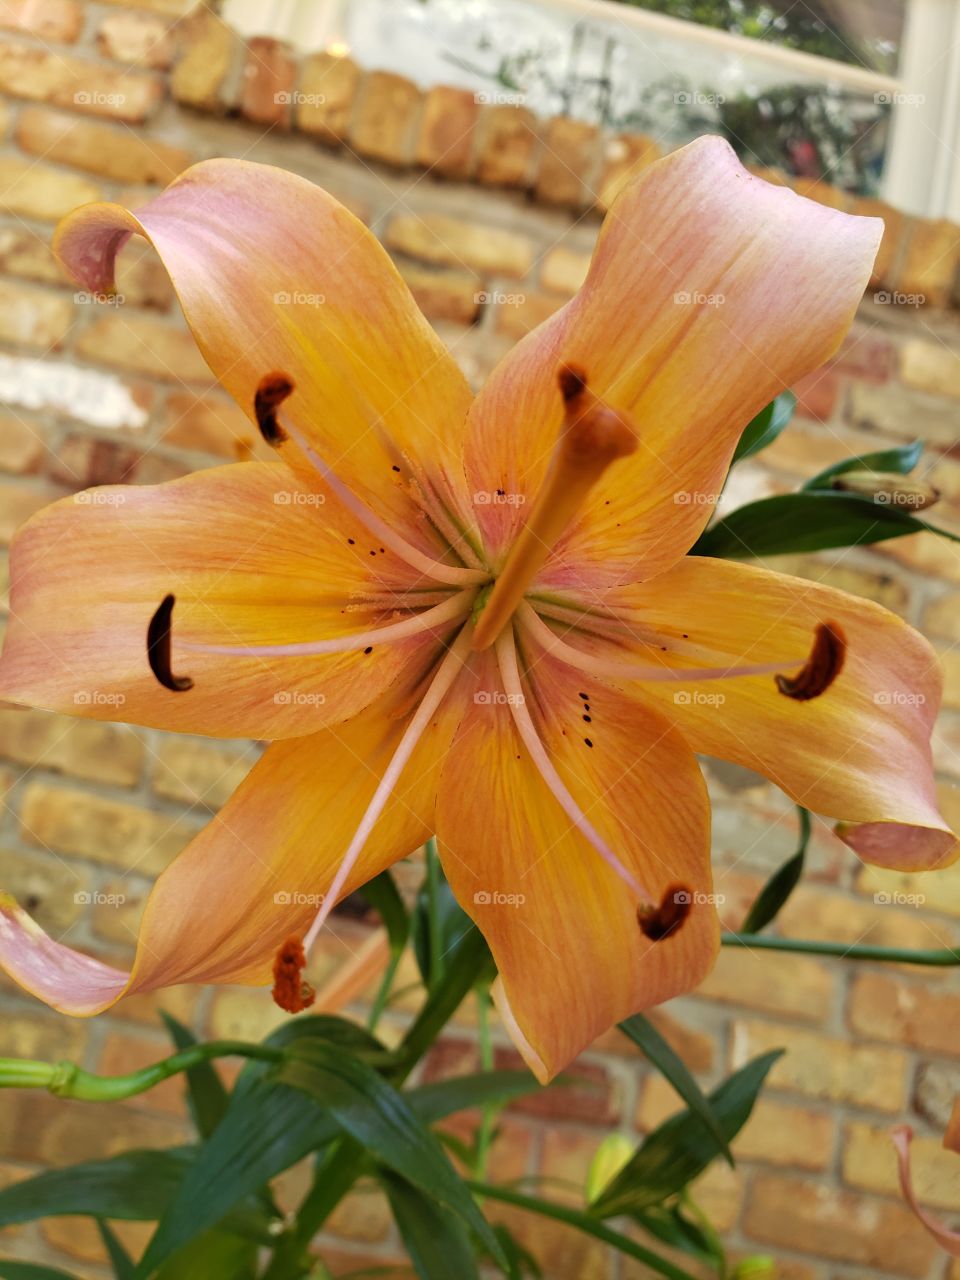 peach color lily curled petals summer bloom